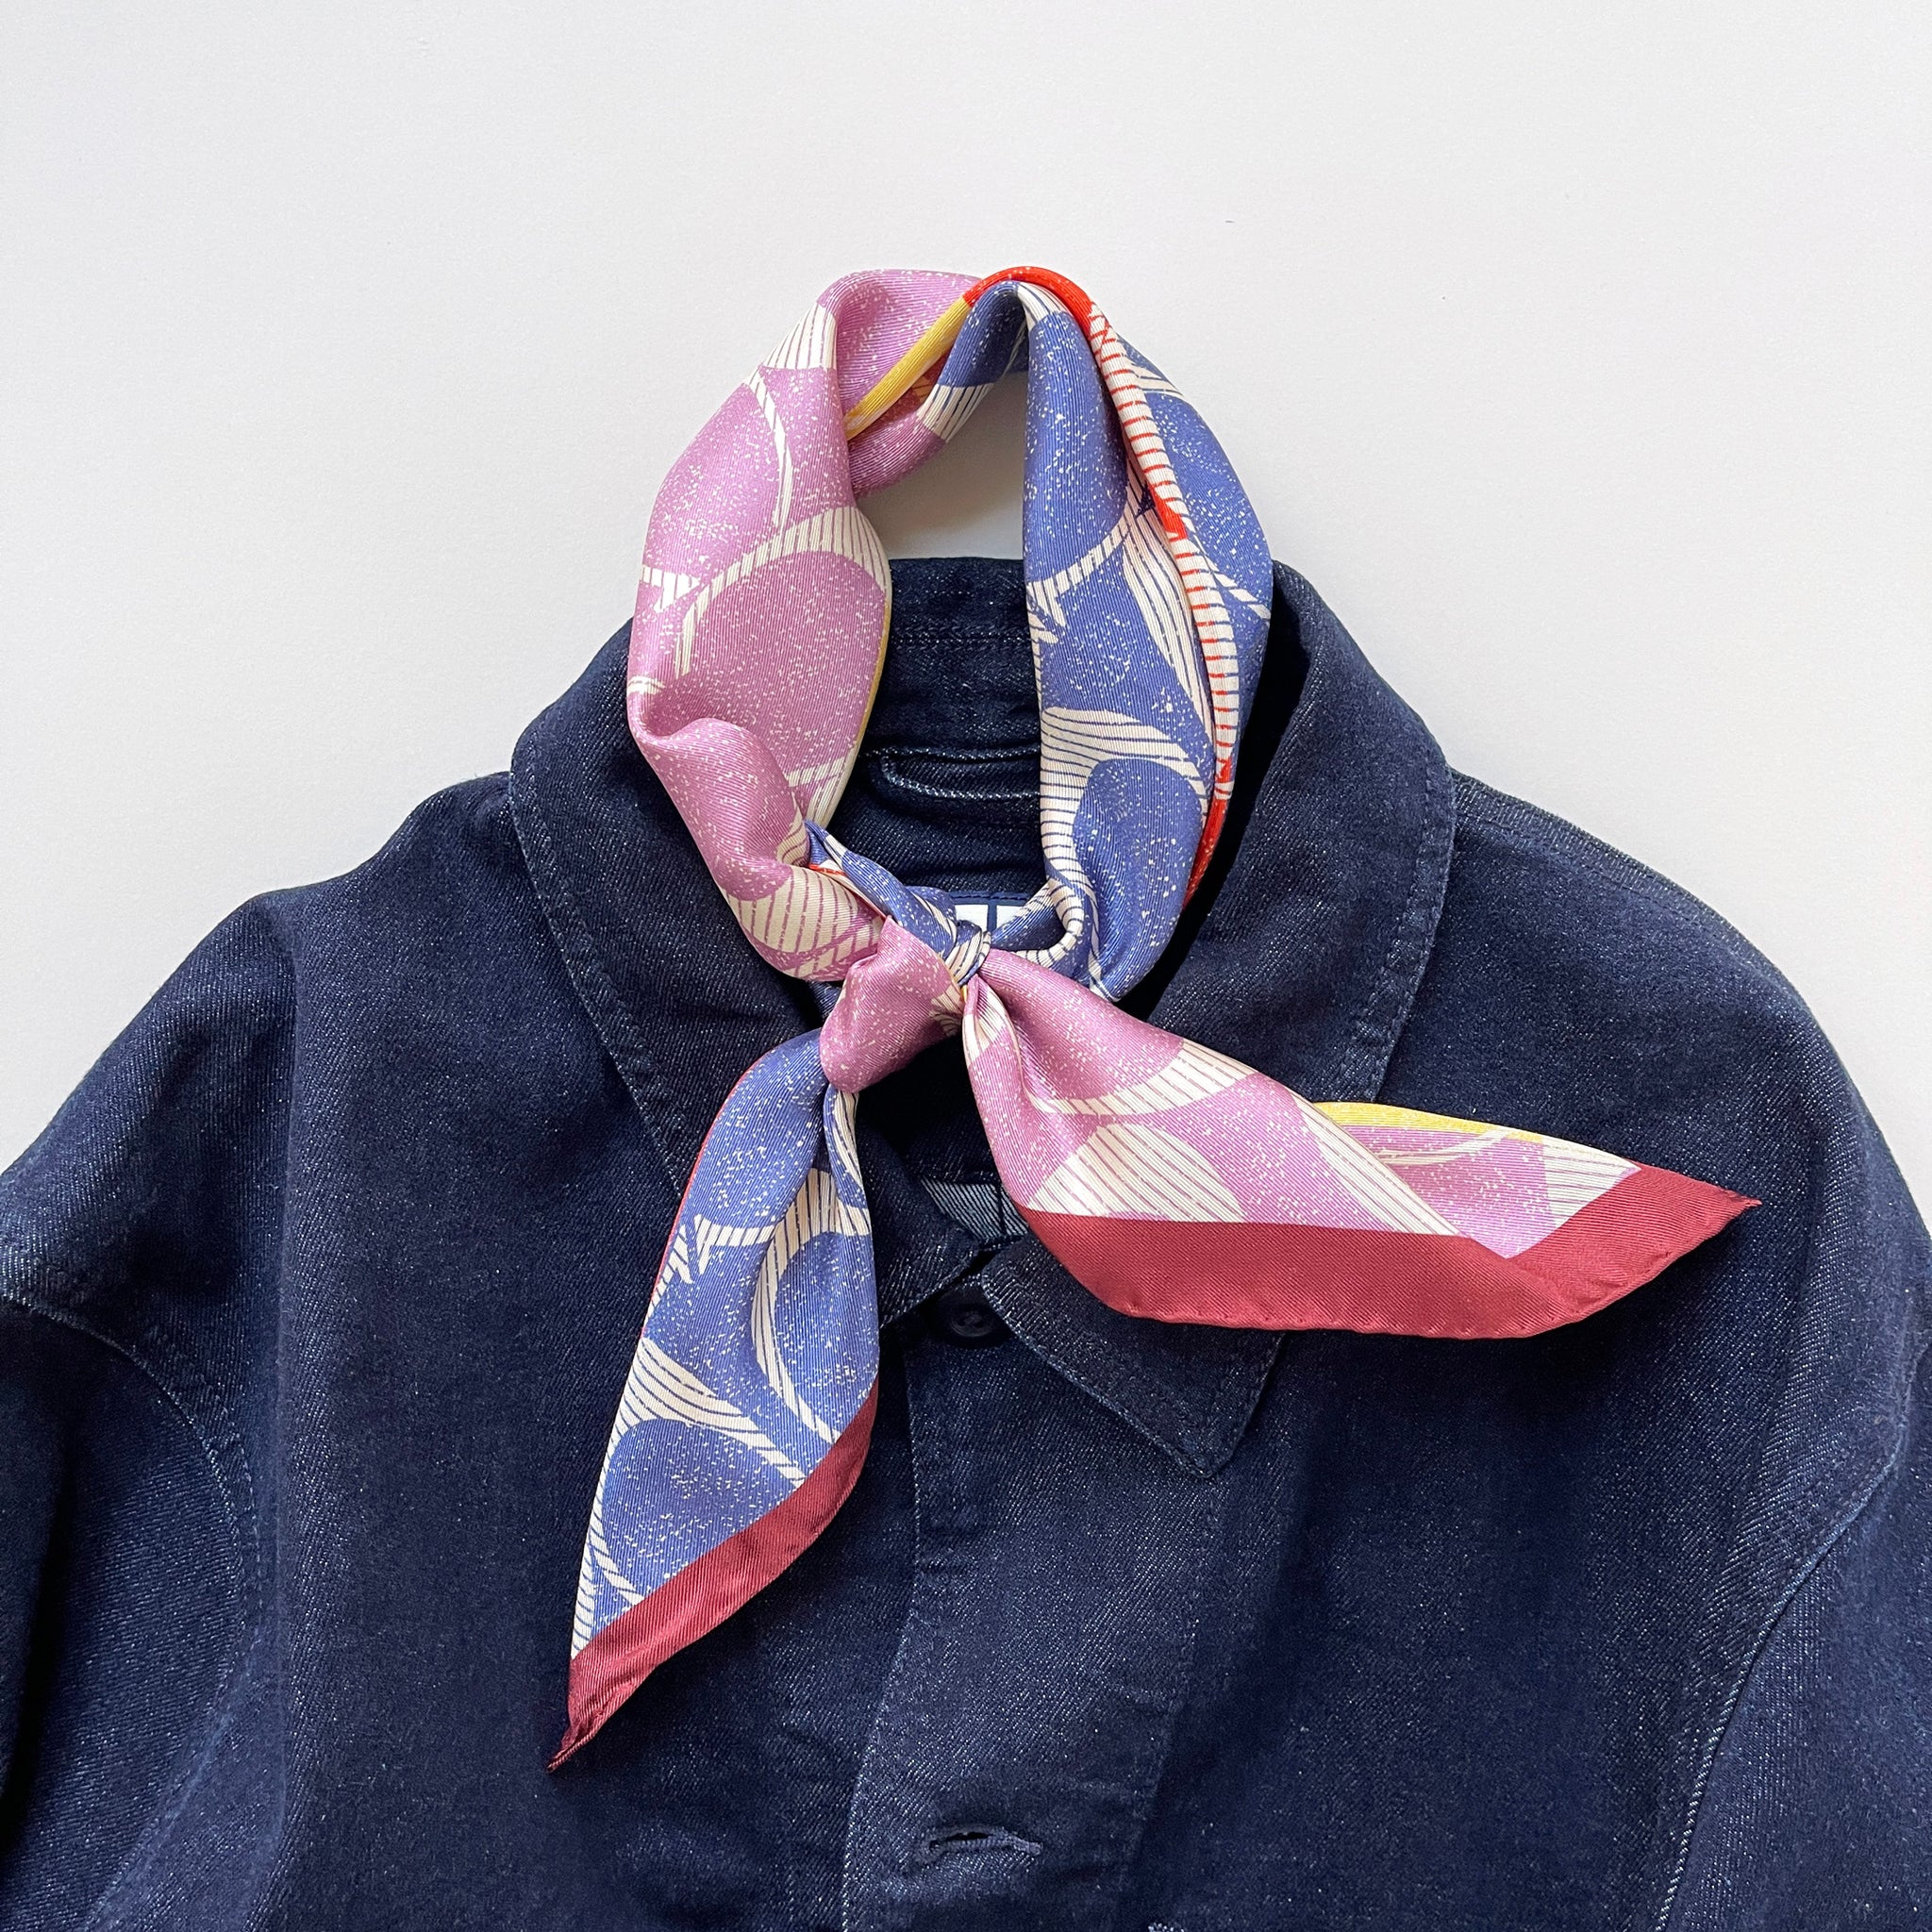 a luxury square silk scarf in lilac oink, blue, orange and yellow featuring burgundy hand-rolled edges and classic print, knotted as a neckerchief, paired with a unisex denim jacket